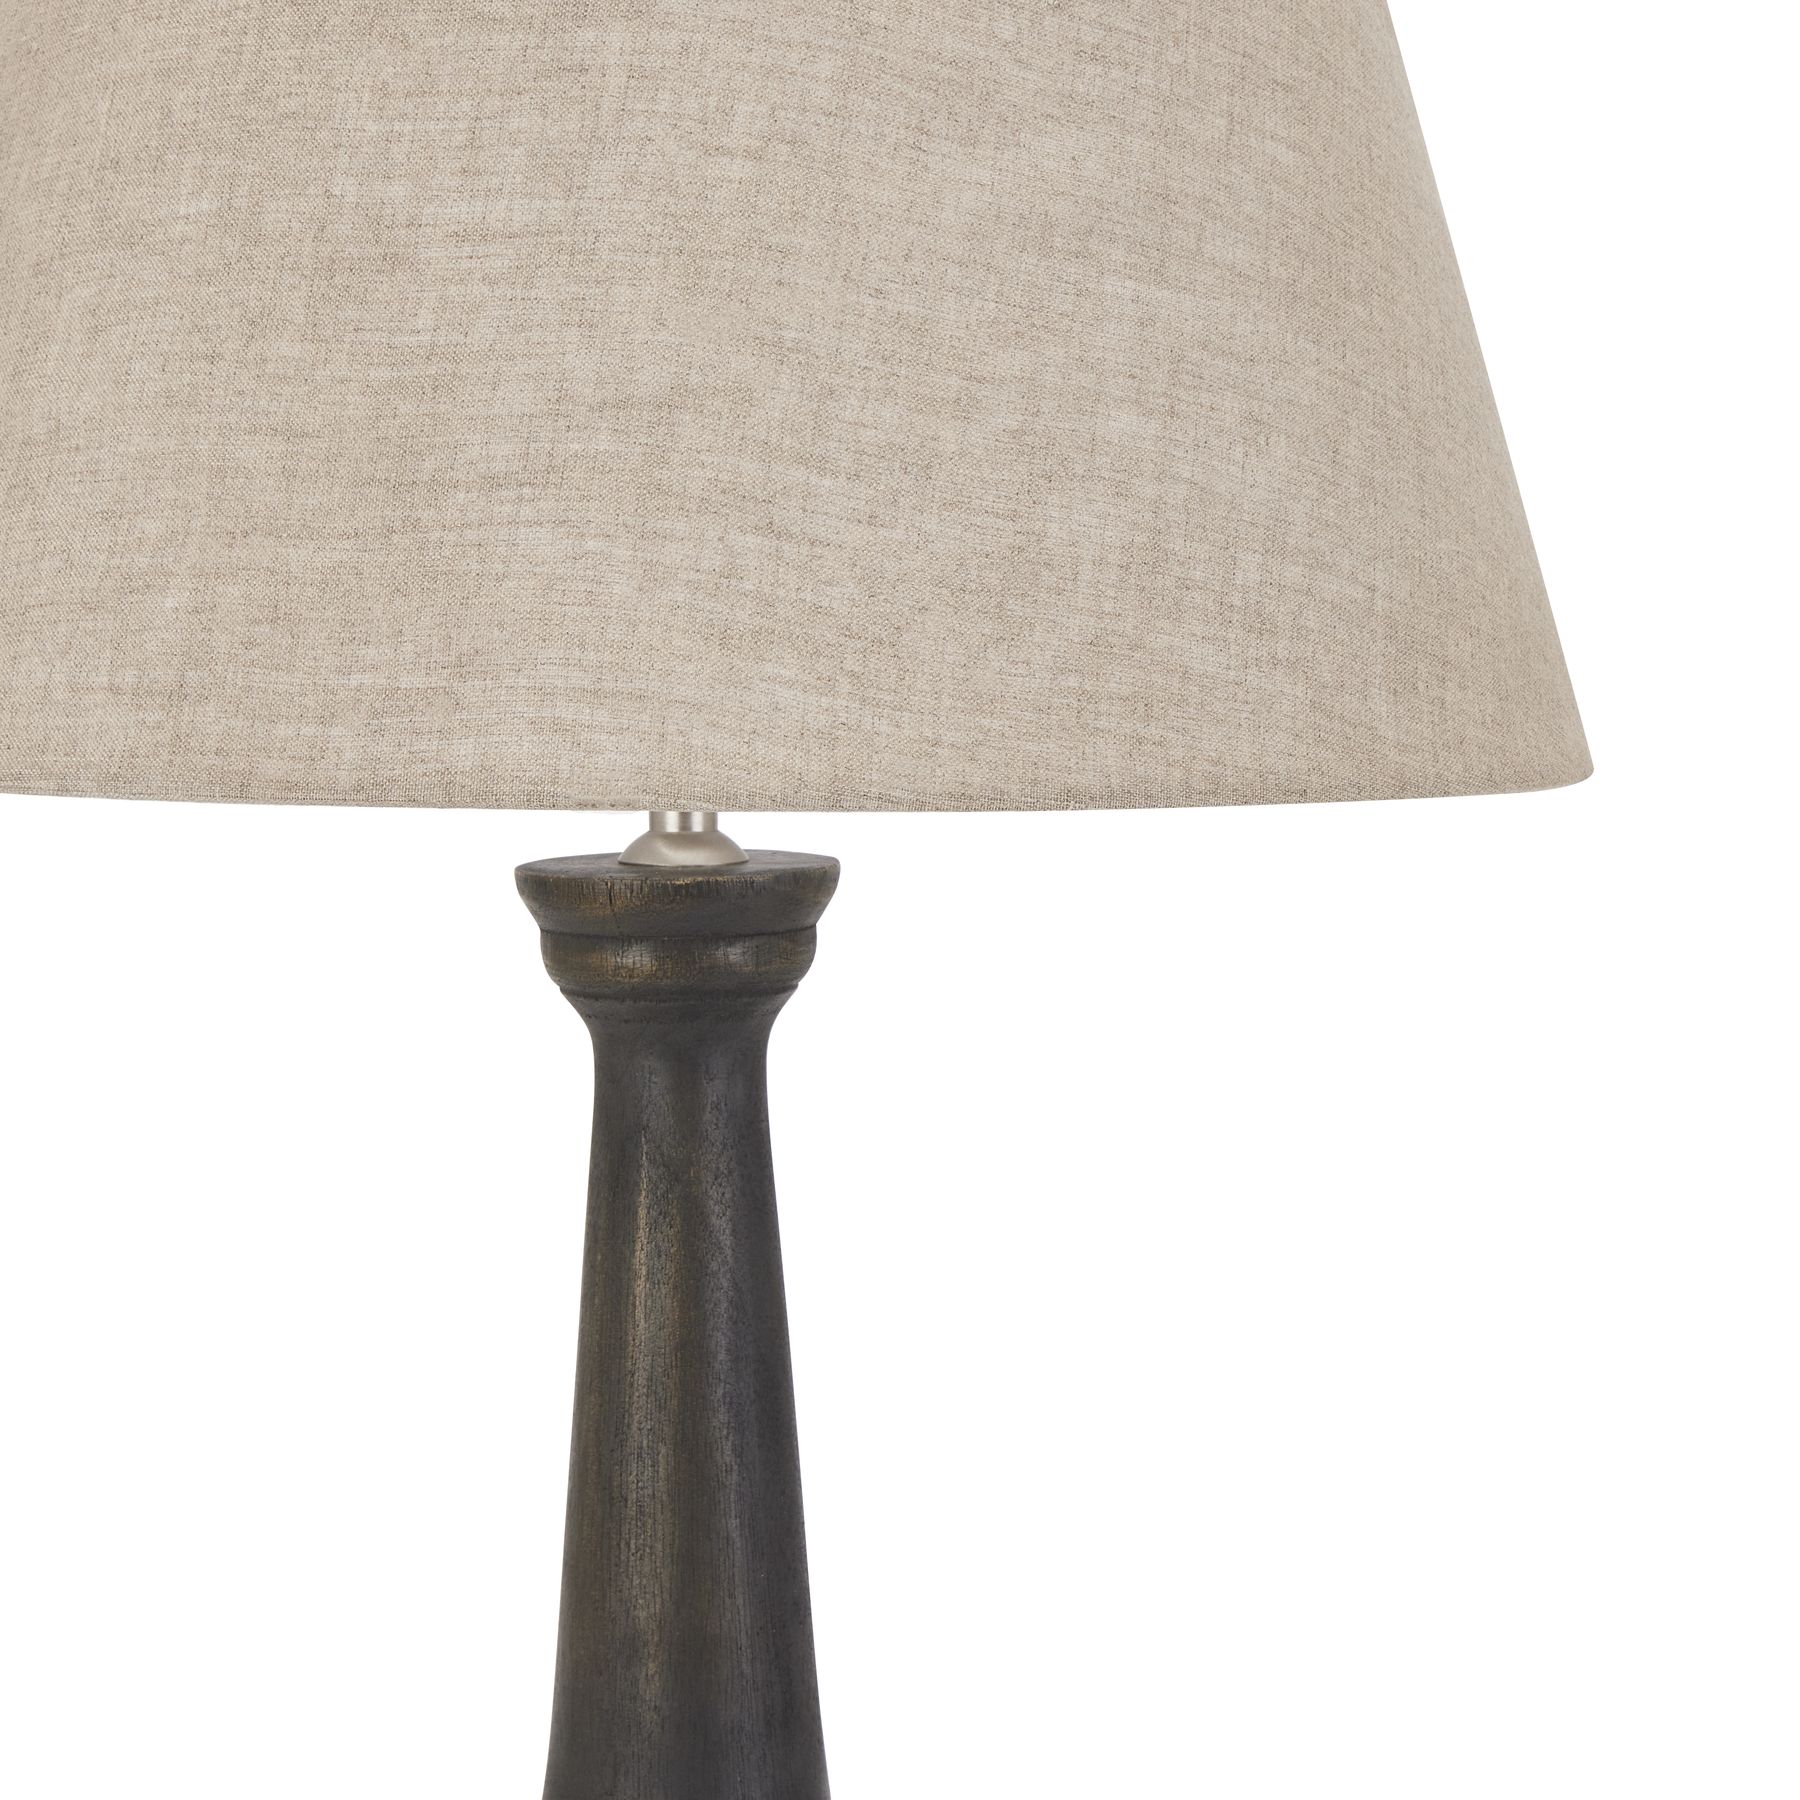 Delaney Grey Goblet Candlestick Lamp With Linen Shade - Image 2